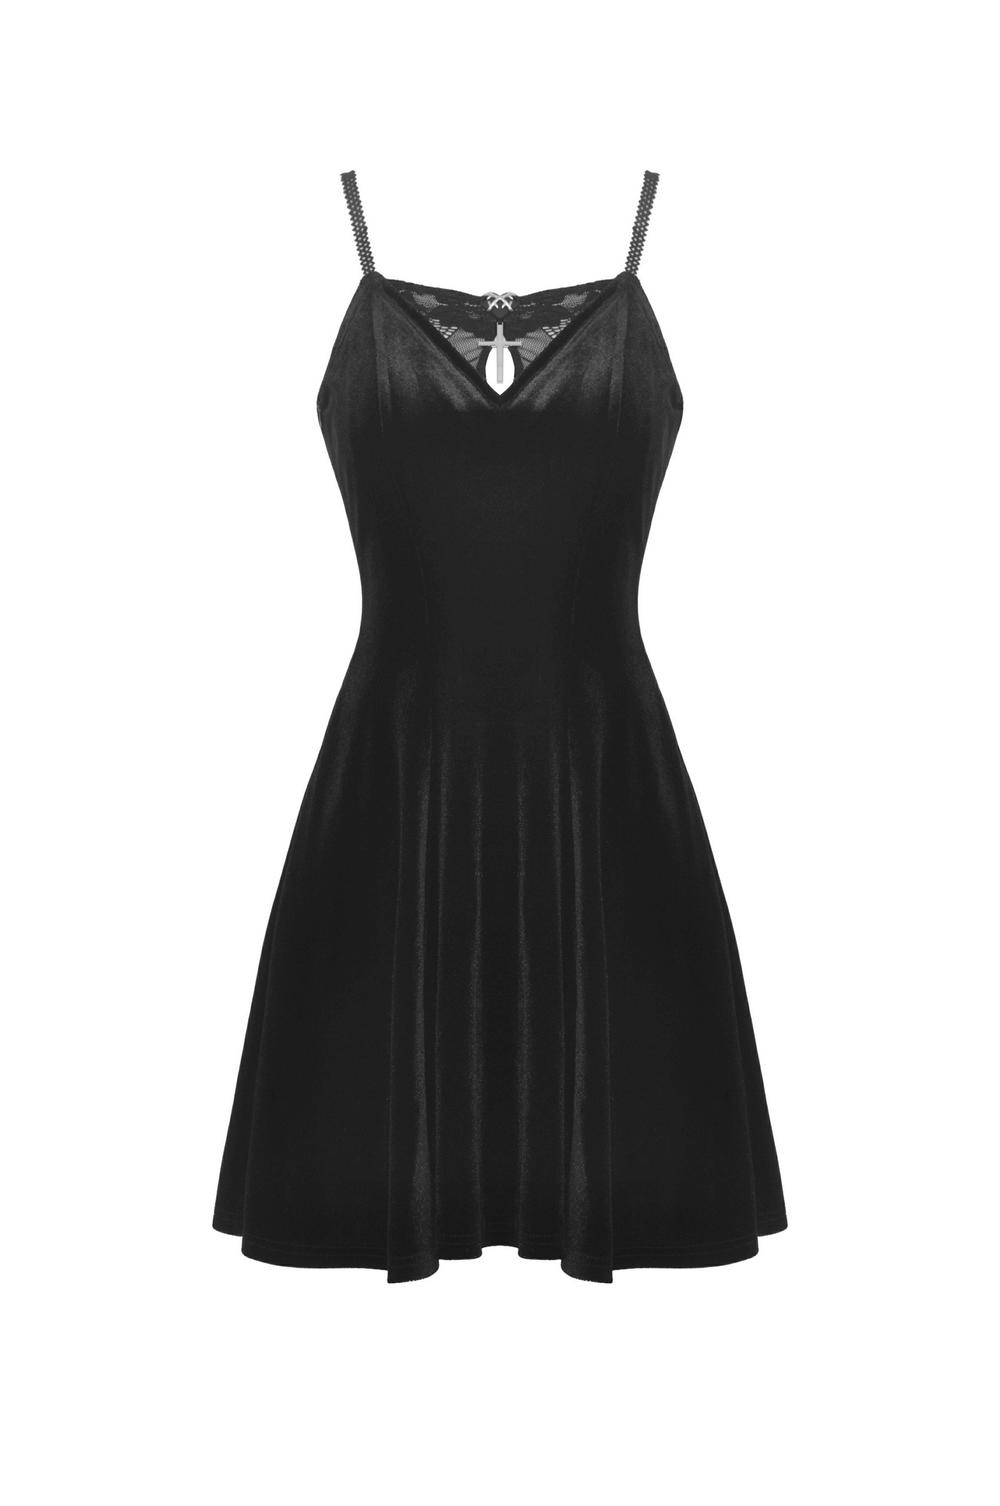 Gothic Batwing Black Dress for Evening and Casual Wear